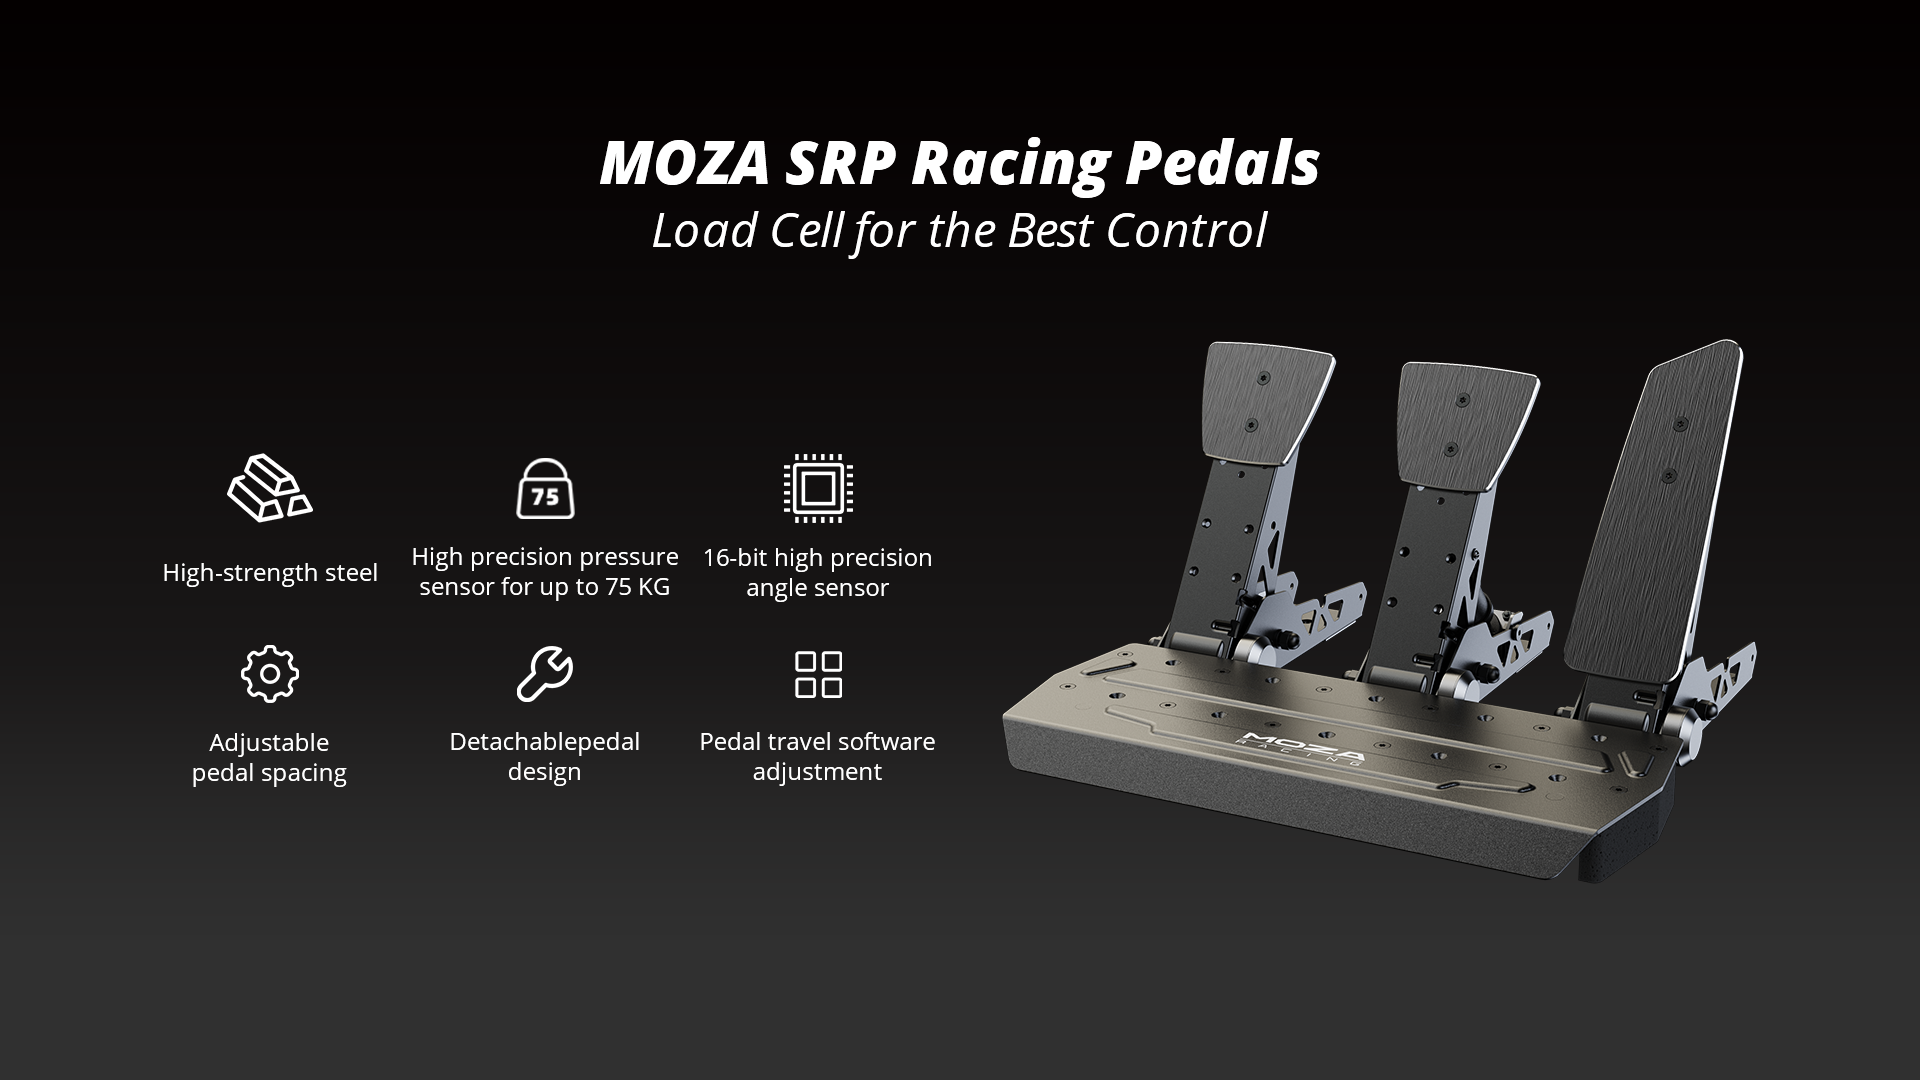 MOZA SRP Pedals